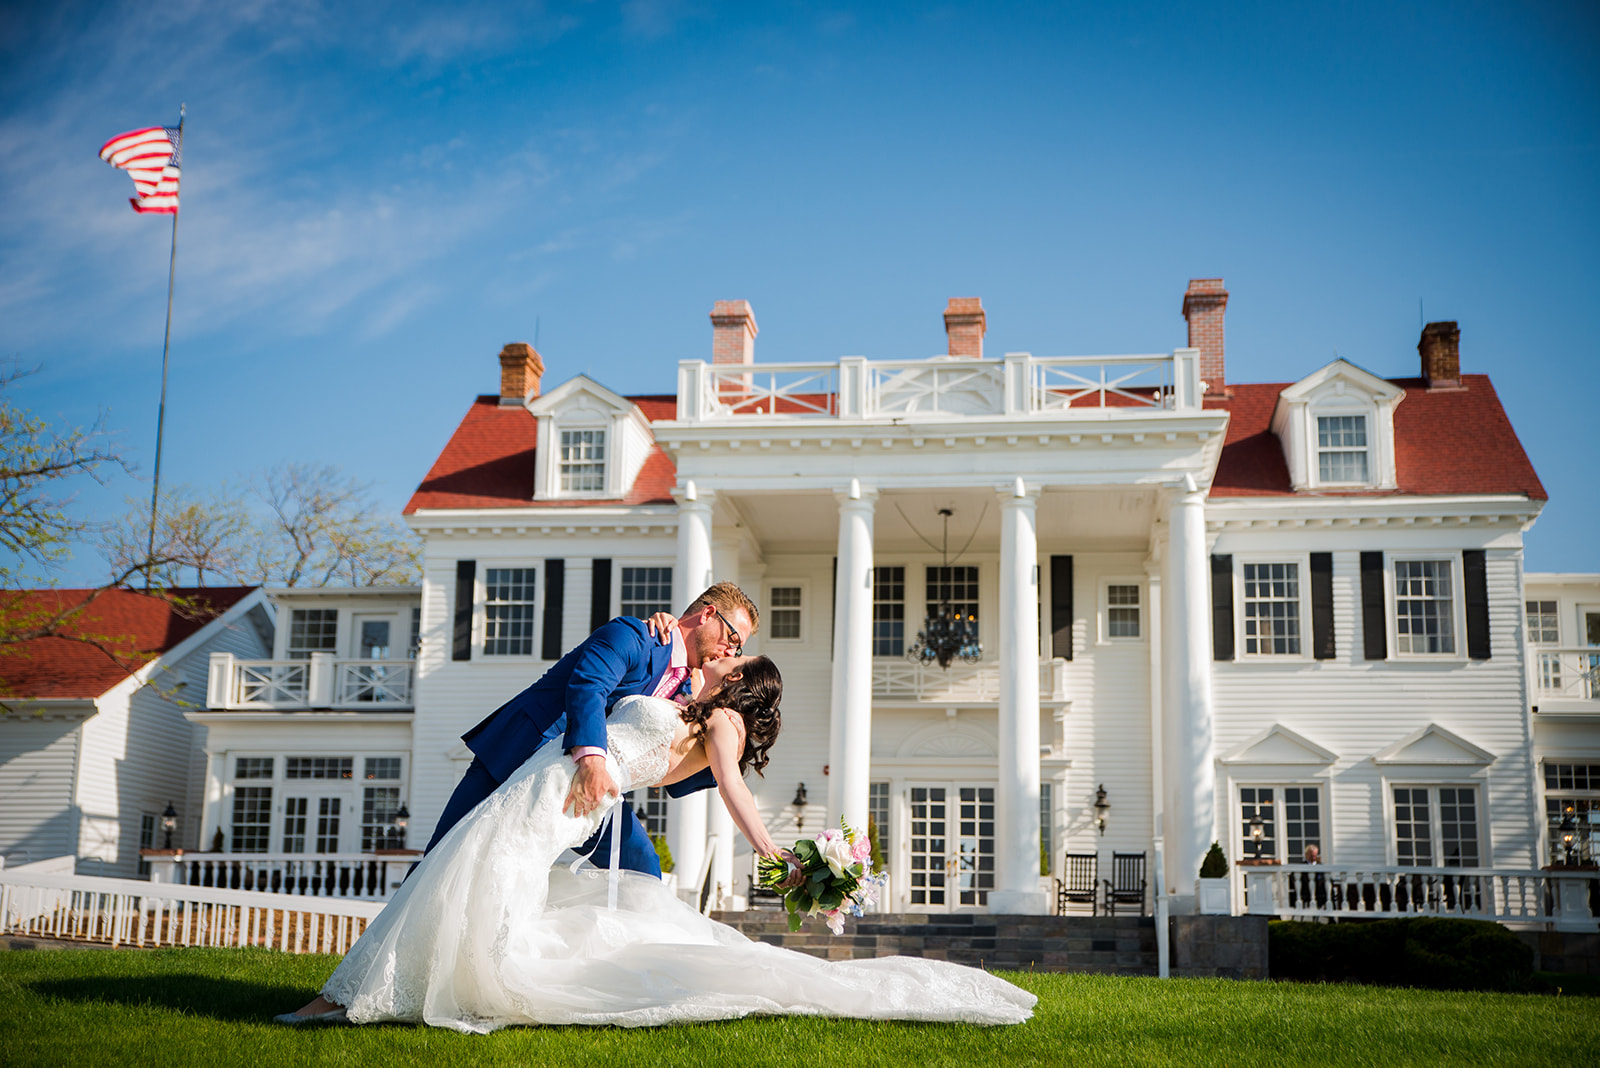 Groom dips bride for a kiss in front of the grand Manor House venue.